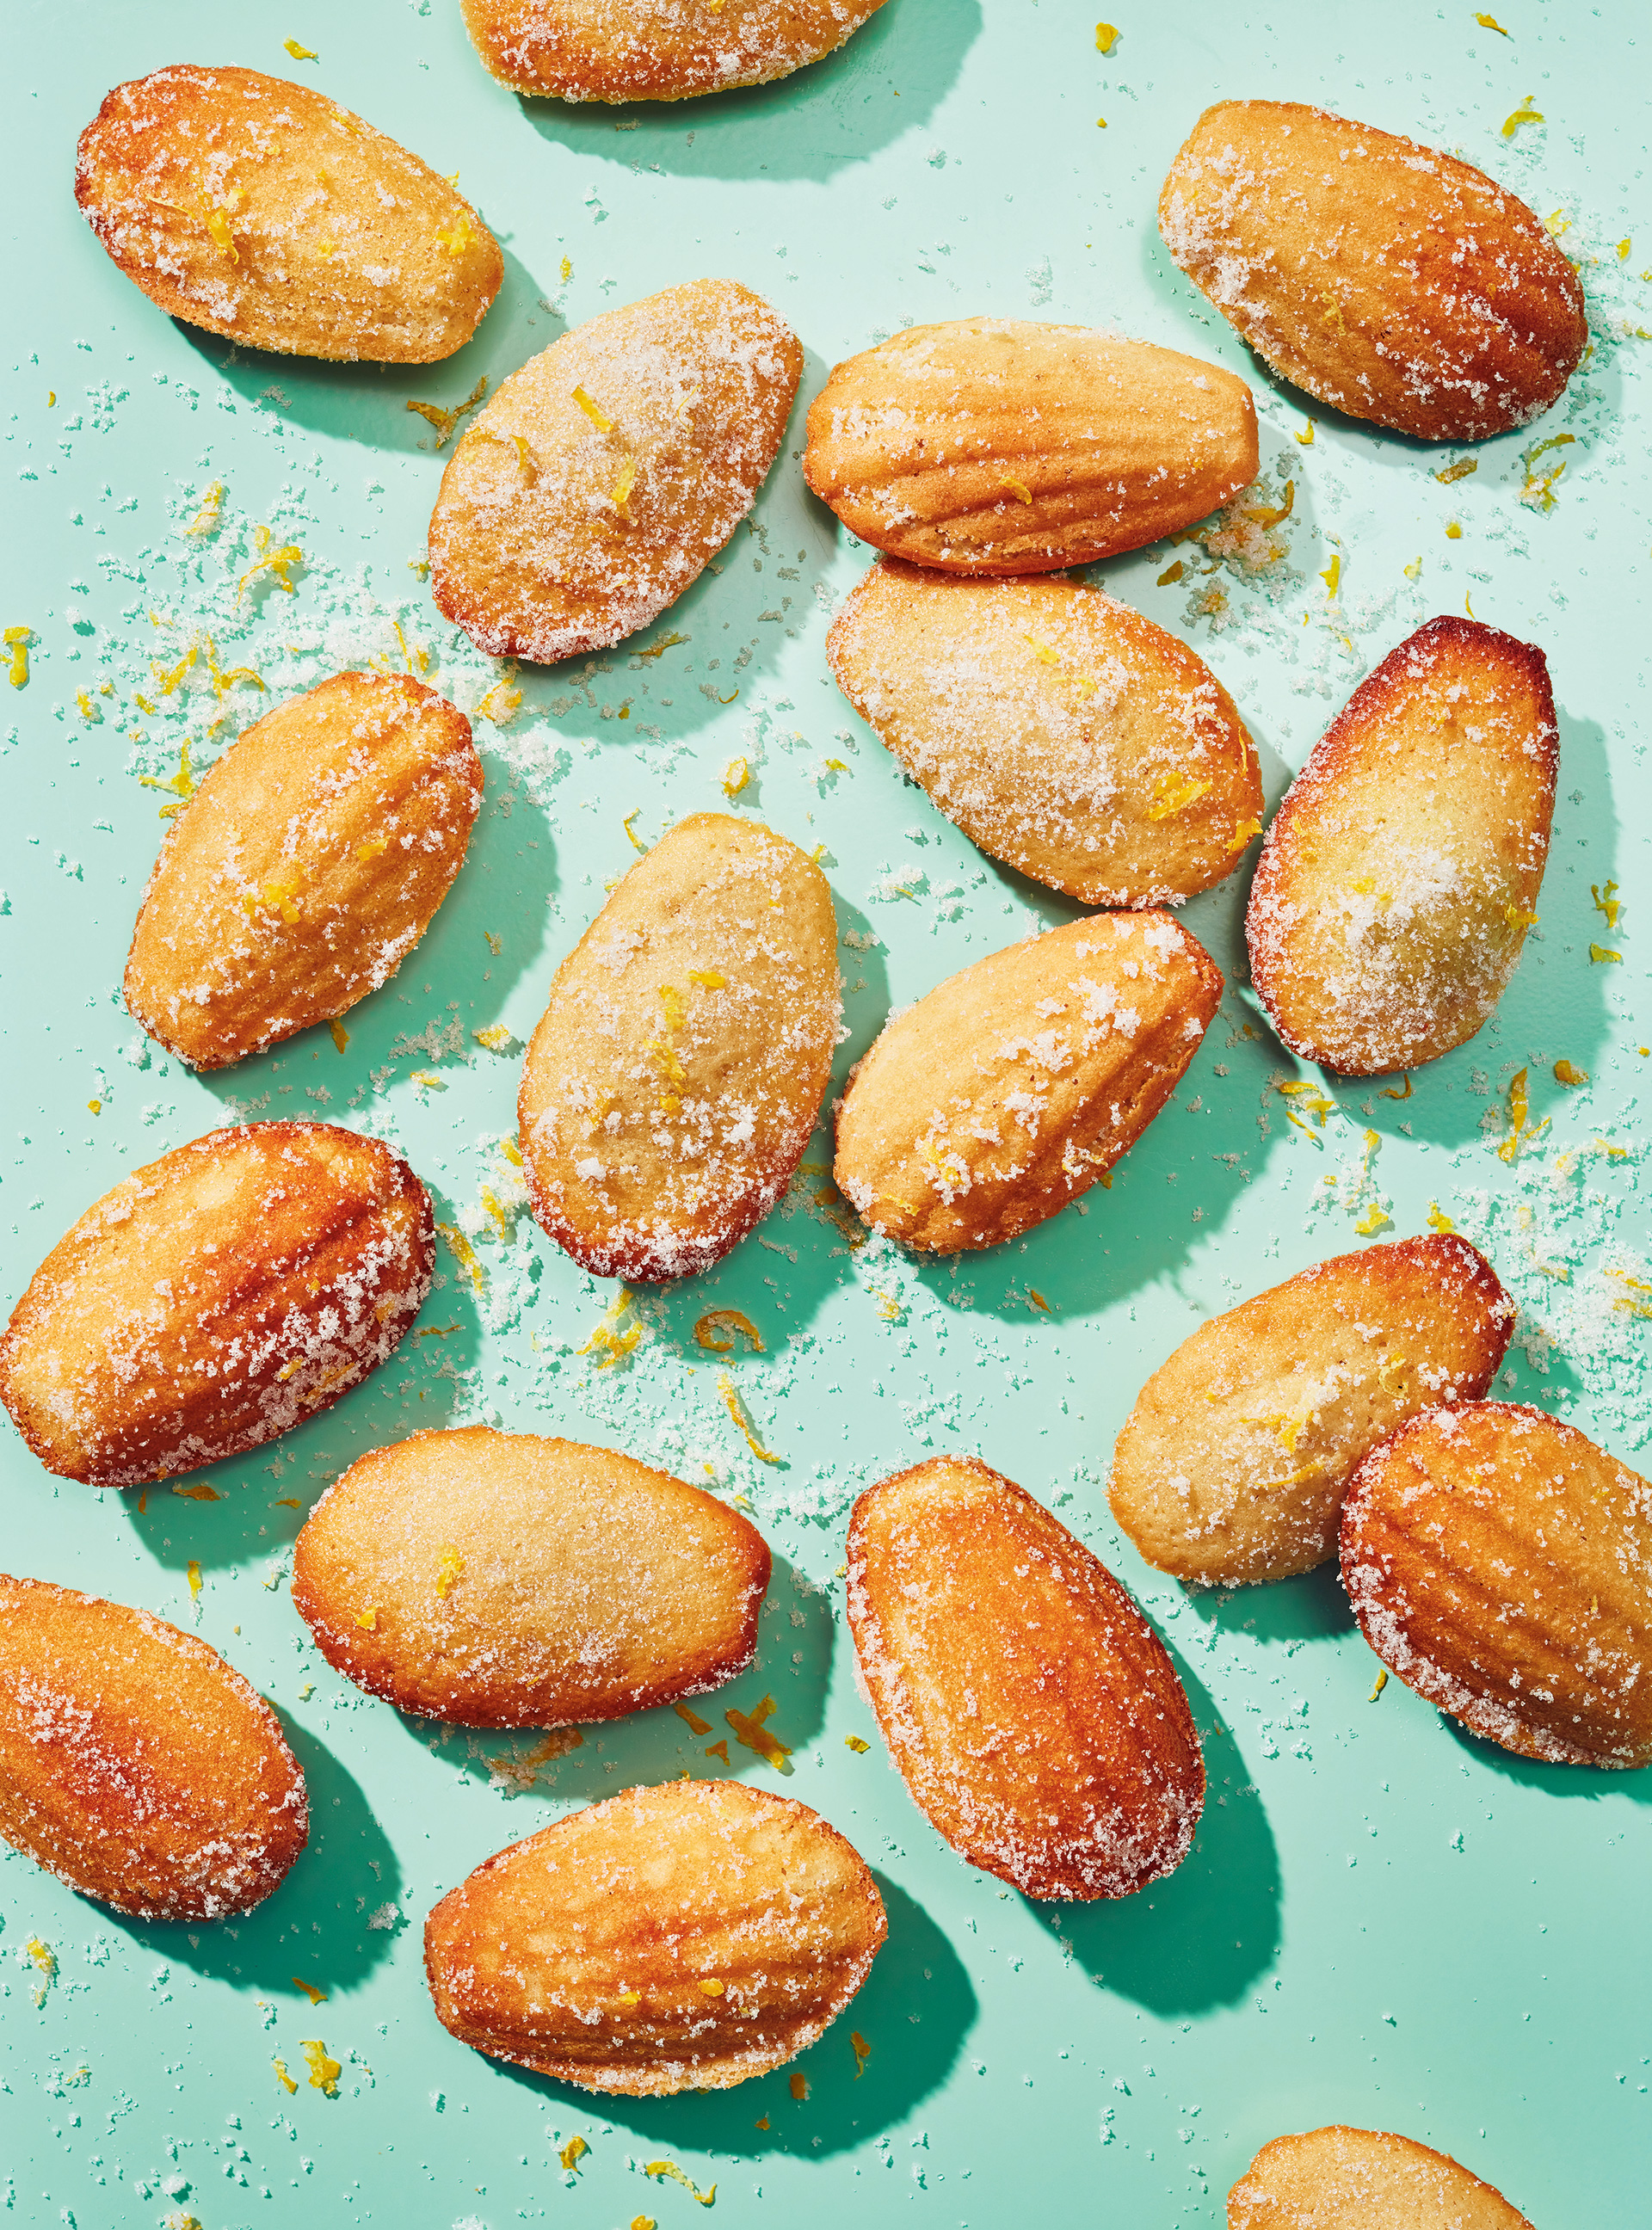 Green Tea and Frosted Lemon Madeleines